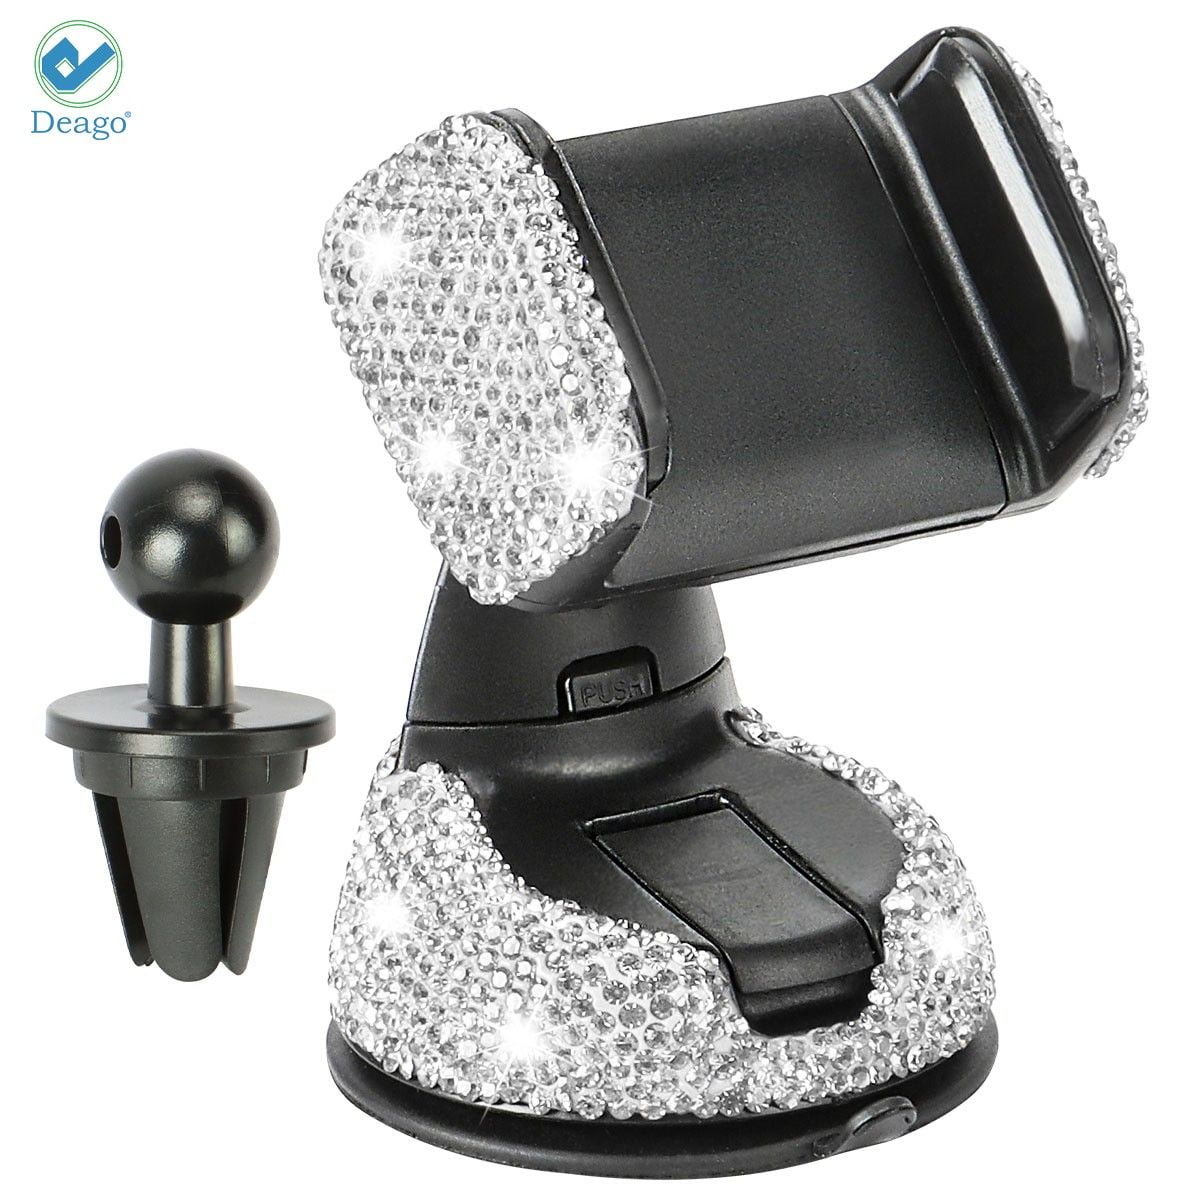 Car Phone Mount Cell Phone Holder Luxury Rhinestone Bling Universal Car Stand Phone Holder with One More Air Vent Base Crystal Phone Mount Holder Cradle for Dashboard Windshield Air Vent Pink 